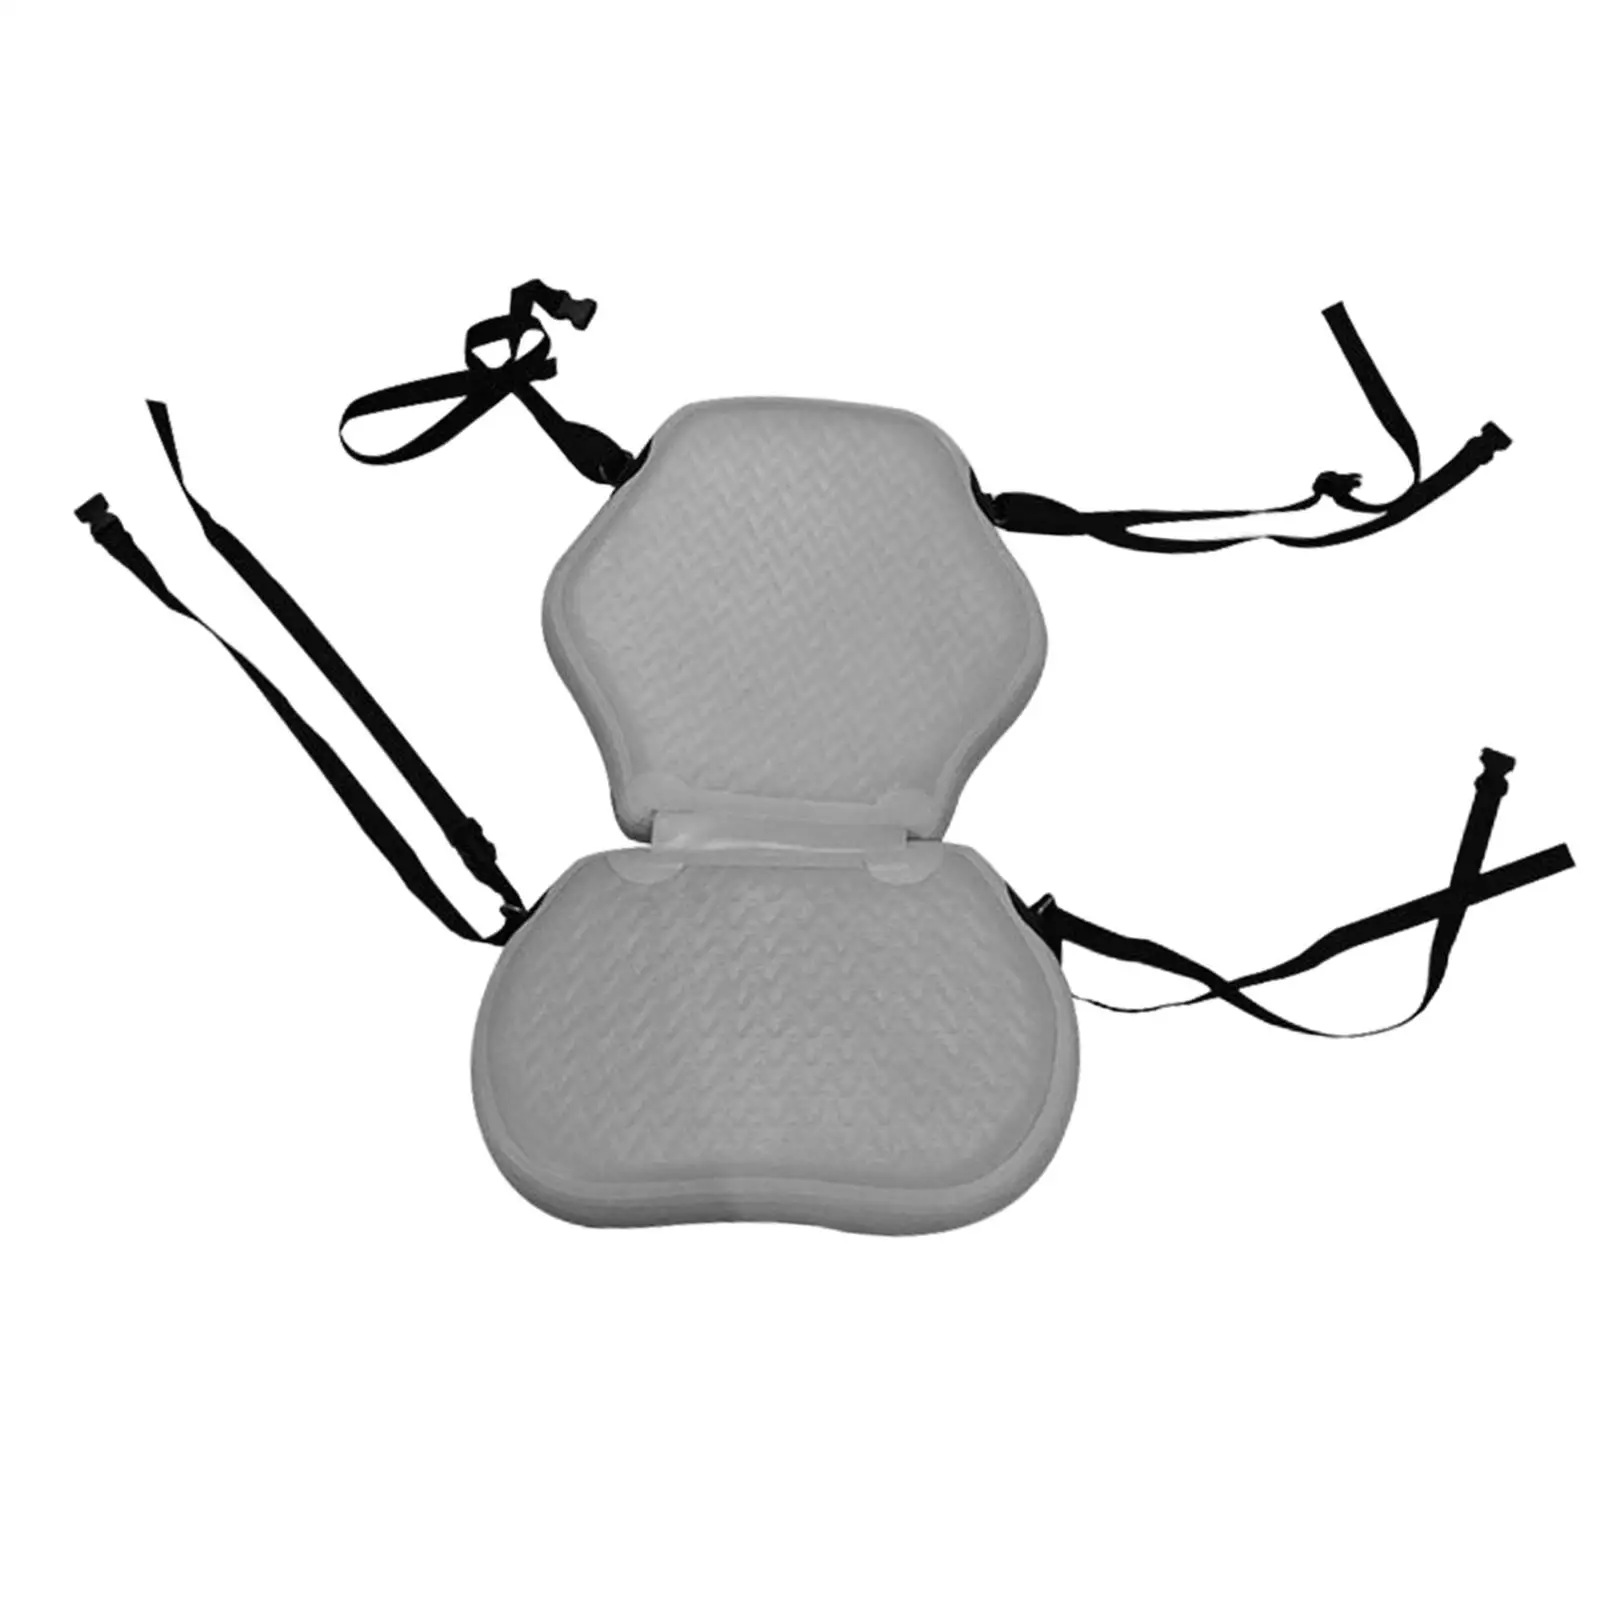 Kayak Backrest and Seat Canoe Seat Adjustable Kayak Replacement Seat Cushion Pad with Back Support for Fishing Boat Rafting